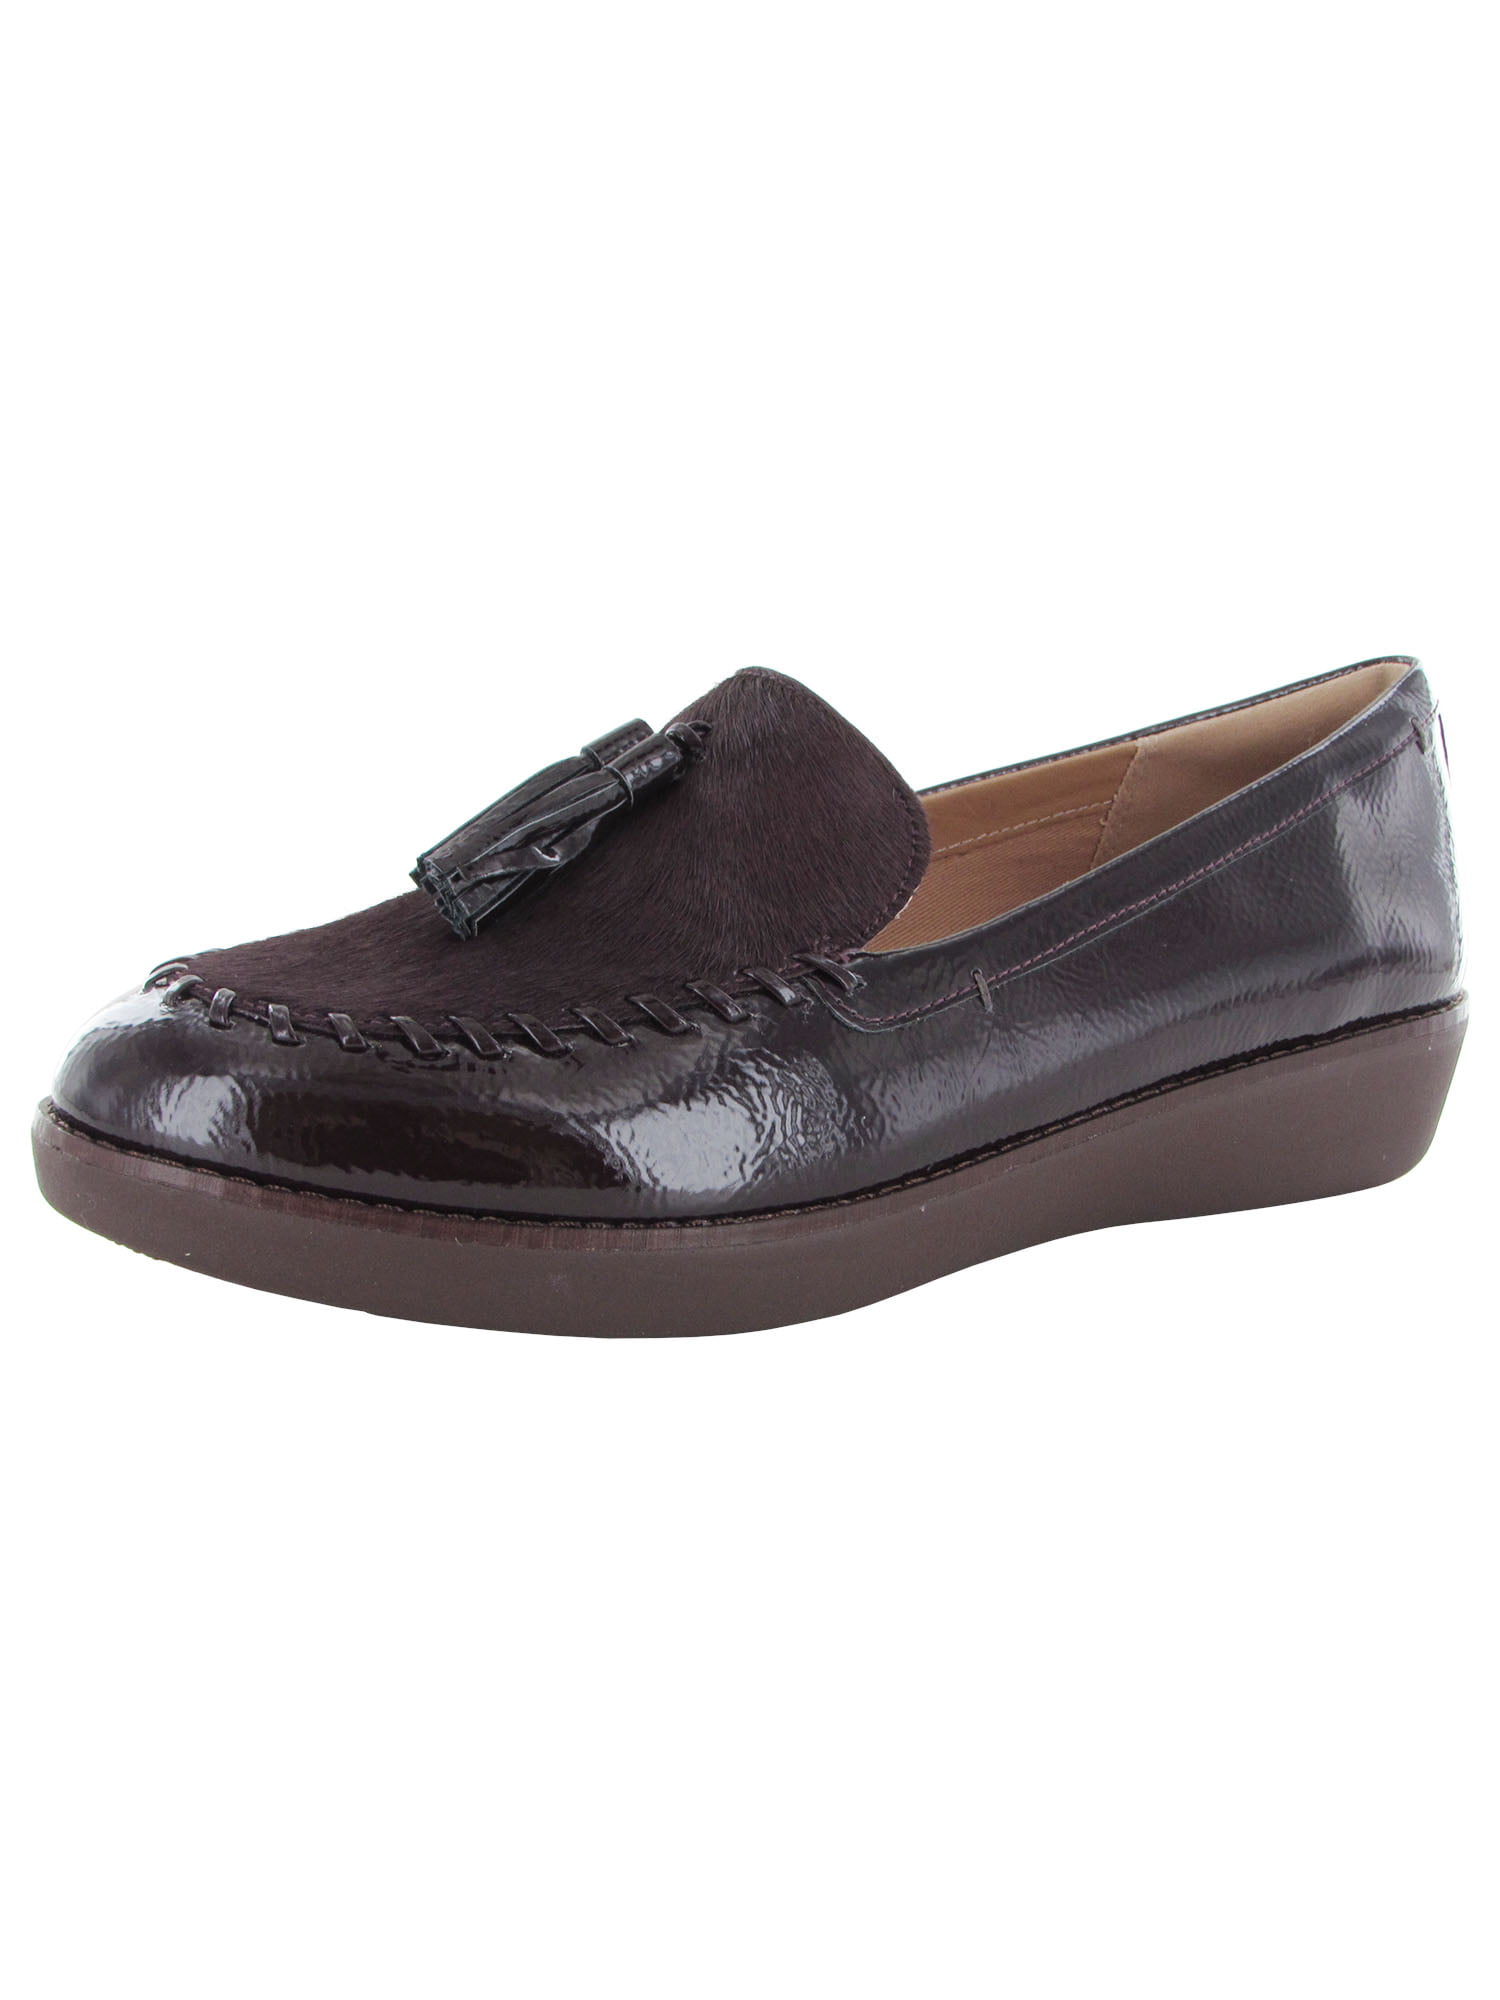 fitflop paige loafers